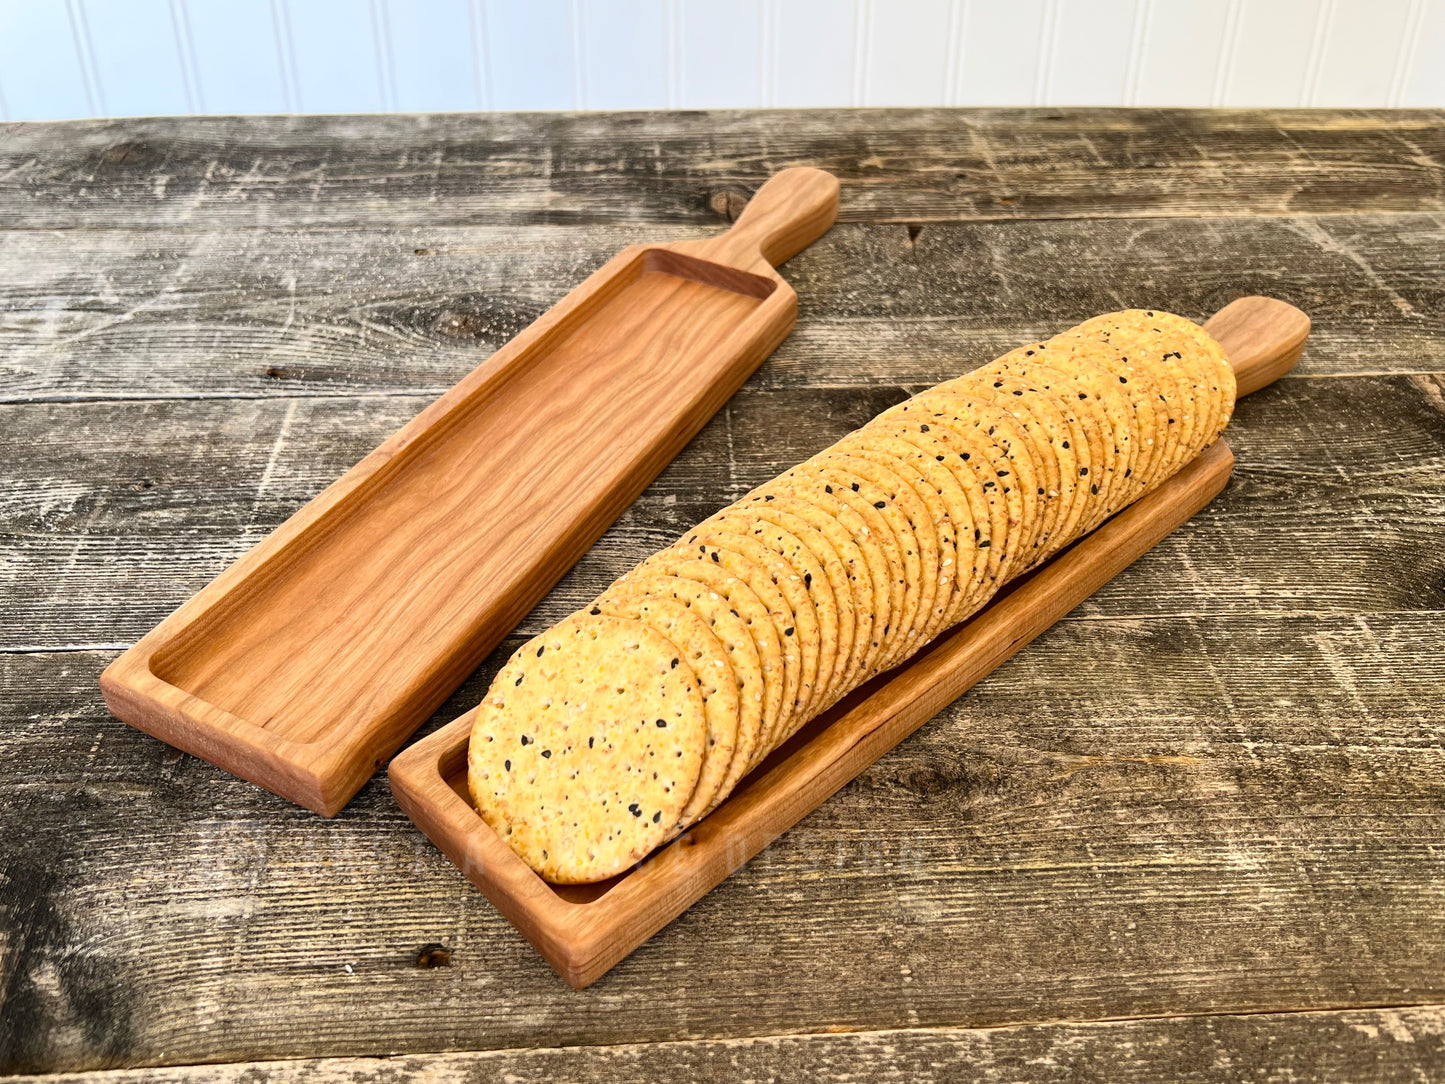 Cheese  & Cracker Tray, Crackers Tray, Cheese Tray, Appetizer Tray, Wood Platter, Serving Tray, Grazing Tray, Cookie Tray, Handmade Gift